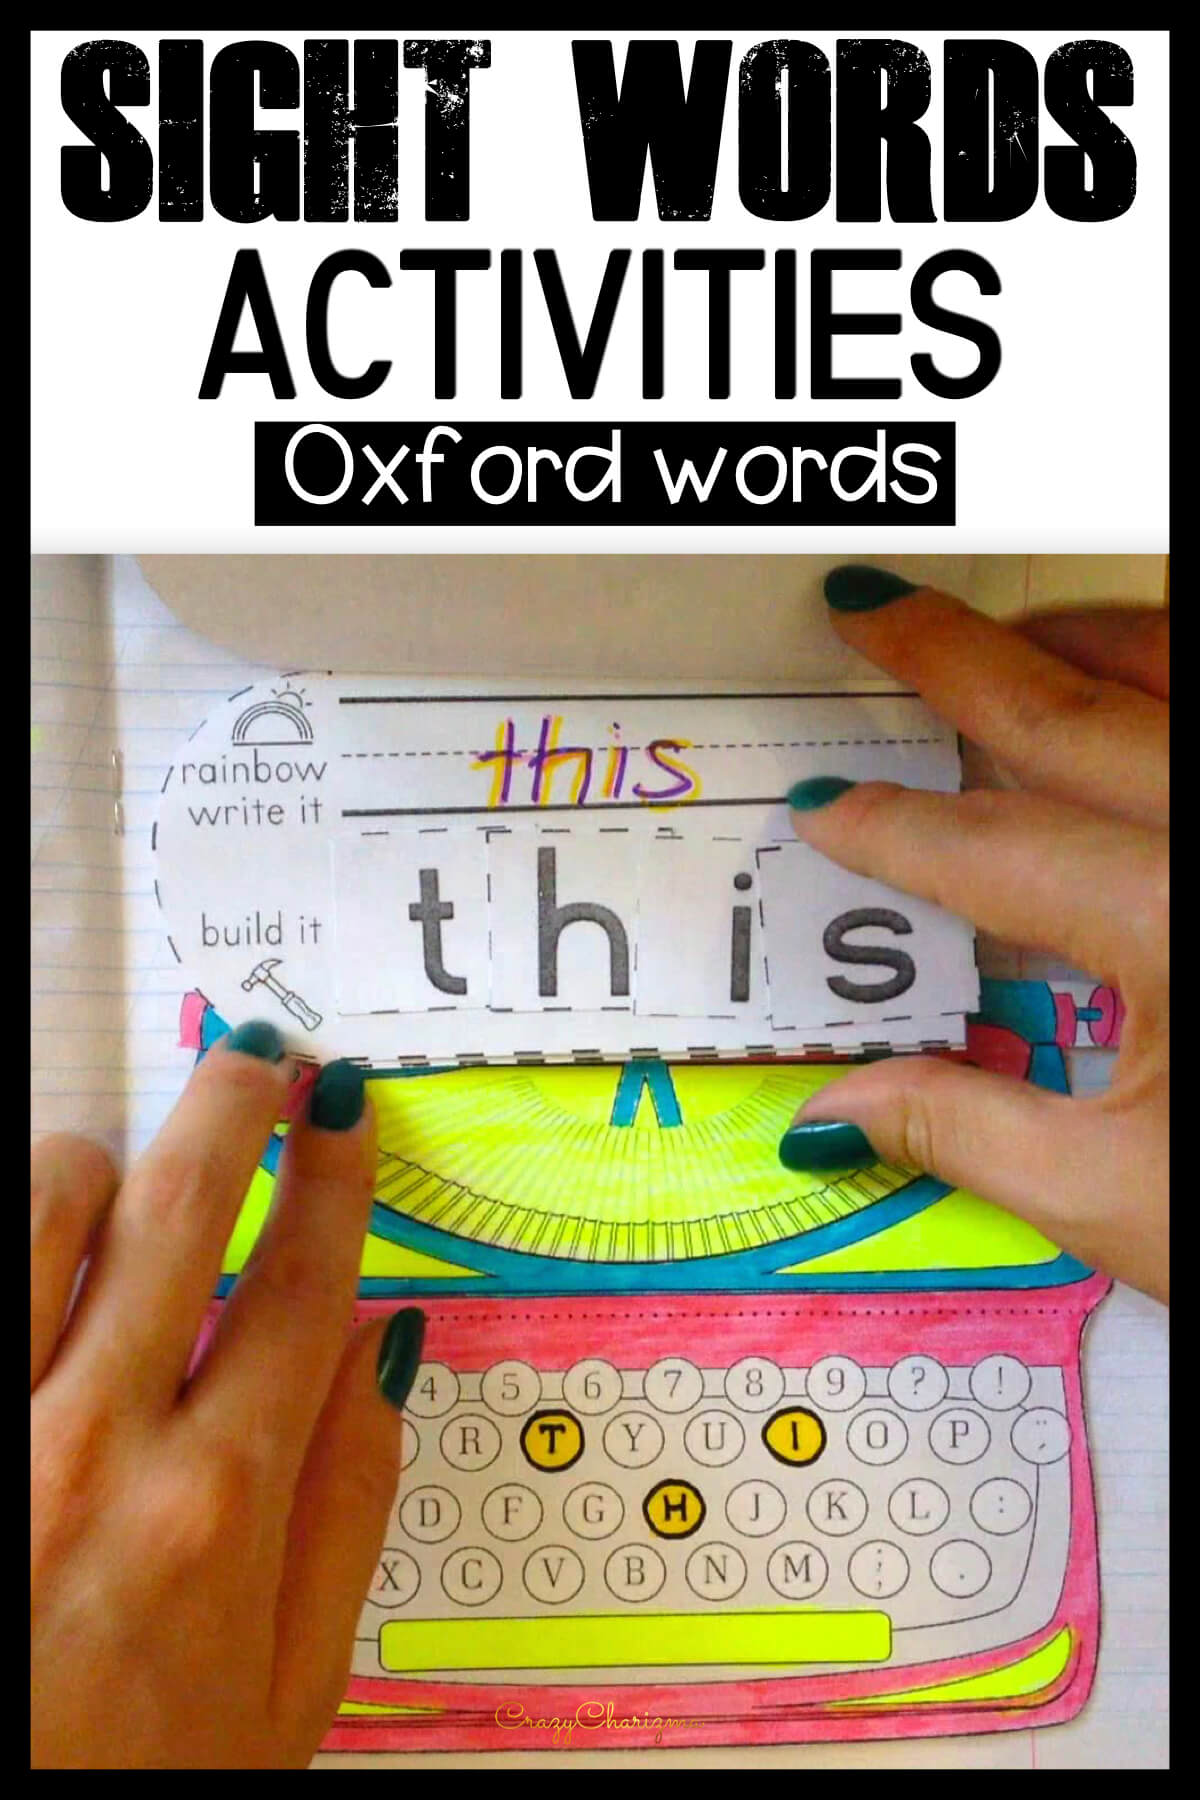 Enjoy hands-on activities and practice high-frequency words from the Oxford words list. Help kids recognize, write, read and learn the top 100 sight words that are key to reading success. Australian Curriculum